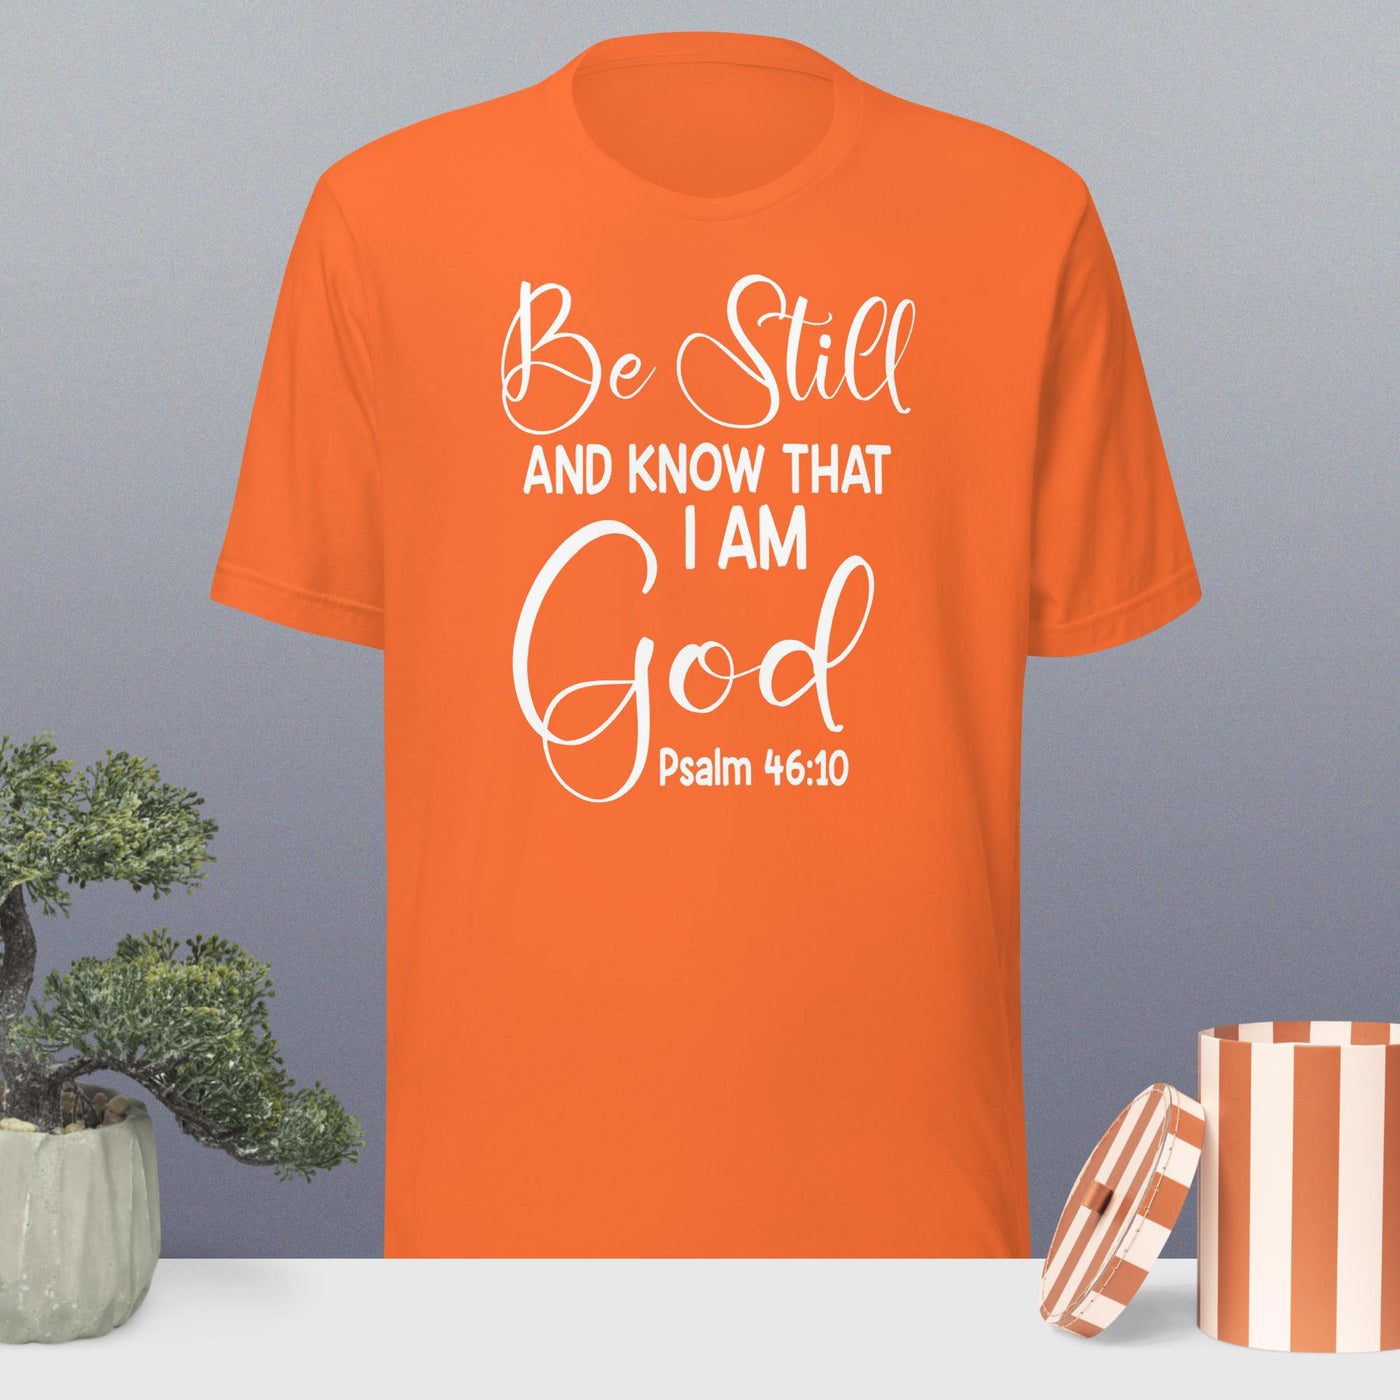 F&H Be Still and know that I am God t-shirt